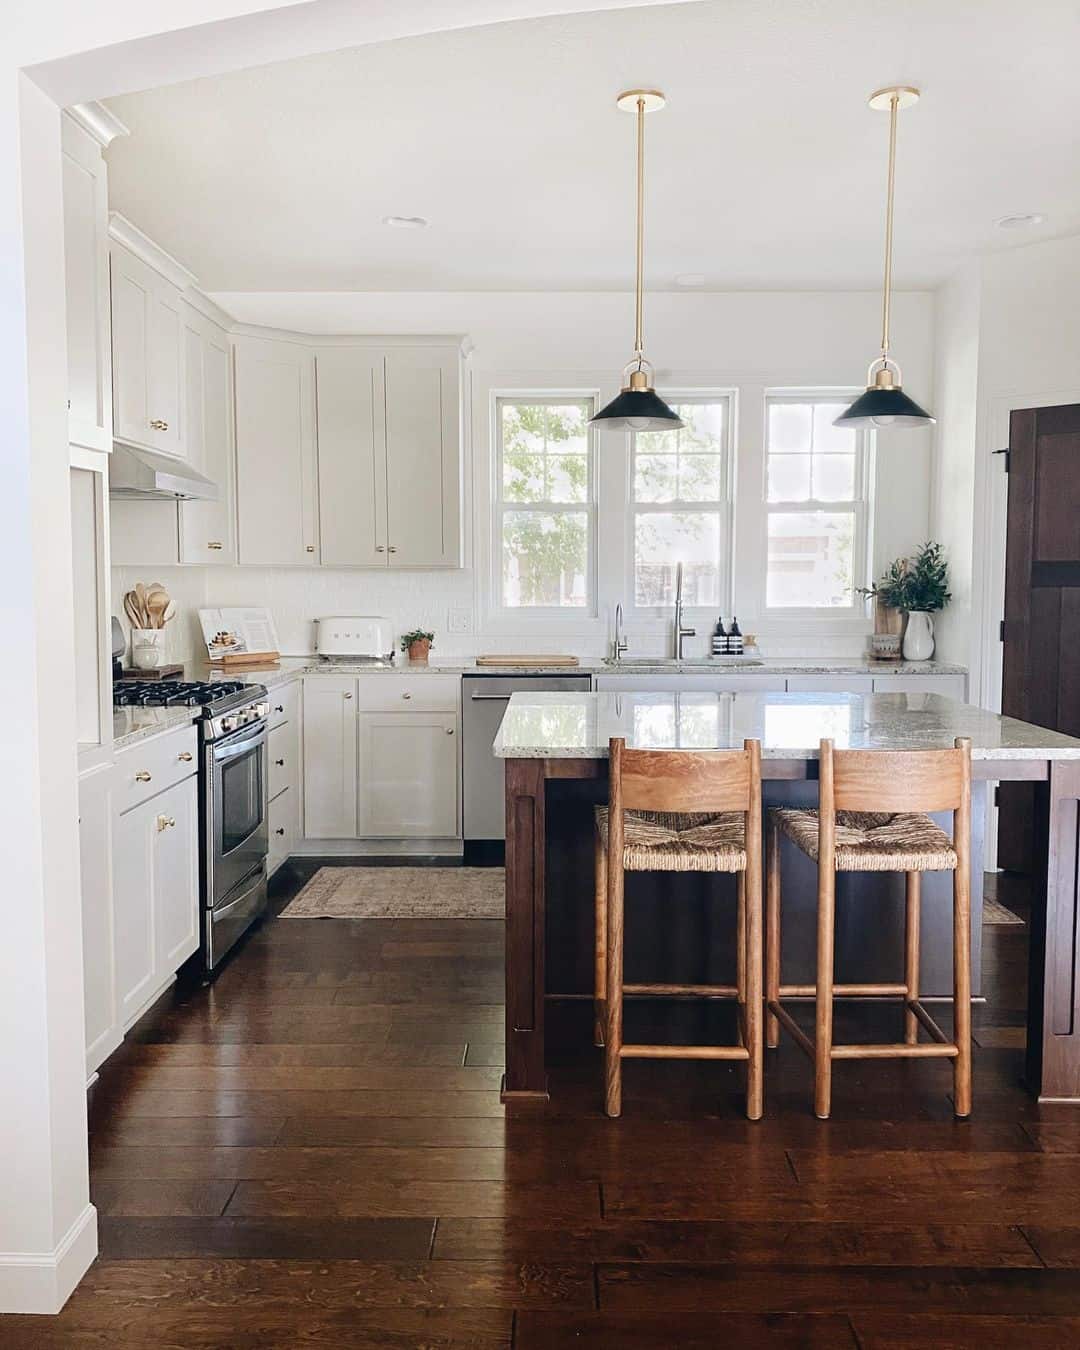 White Cabinets With Chocolate Brown Wood - Soul & Lane